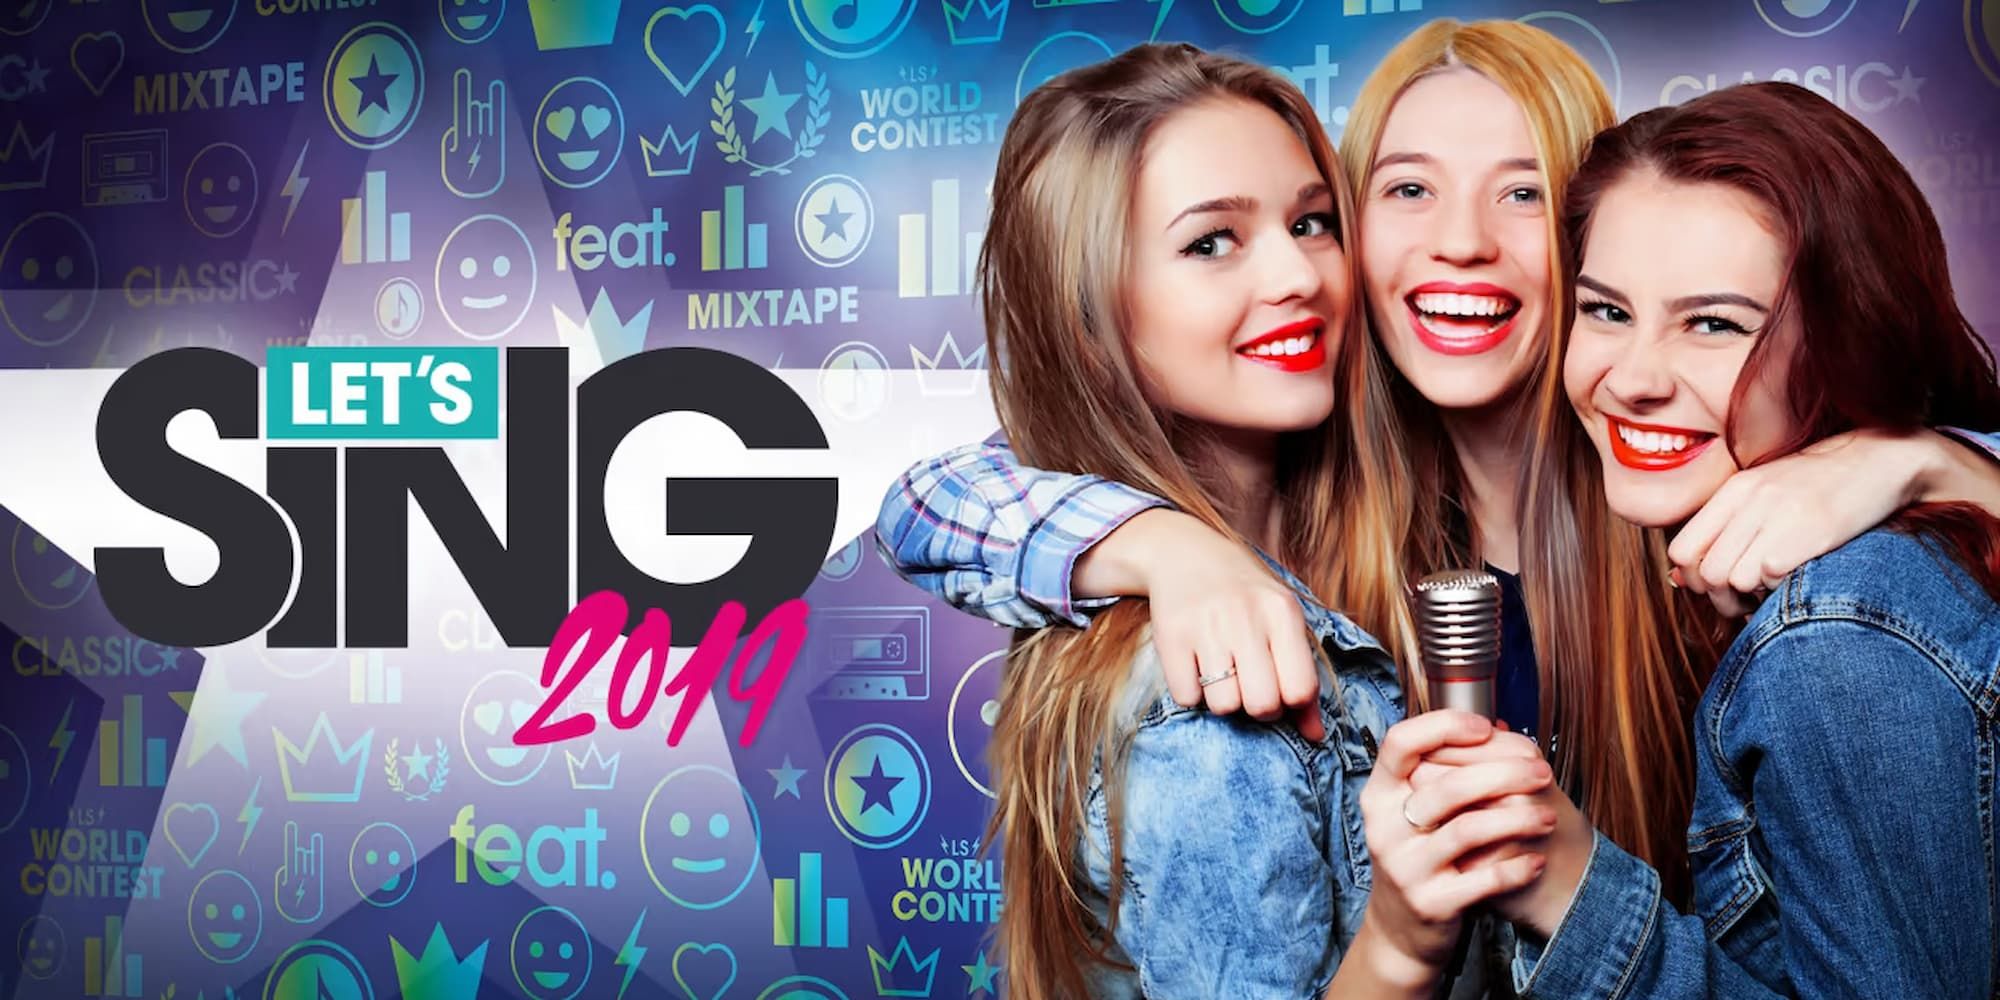 One girl puts her arms over the shoulders of two other girls who are holding a microphone in the cover image of Let's Sing 2019.